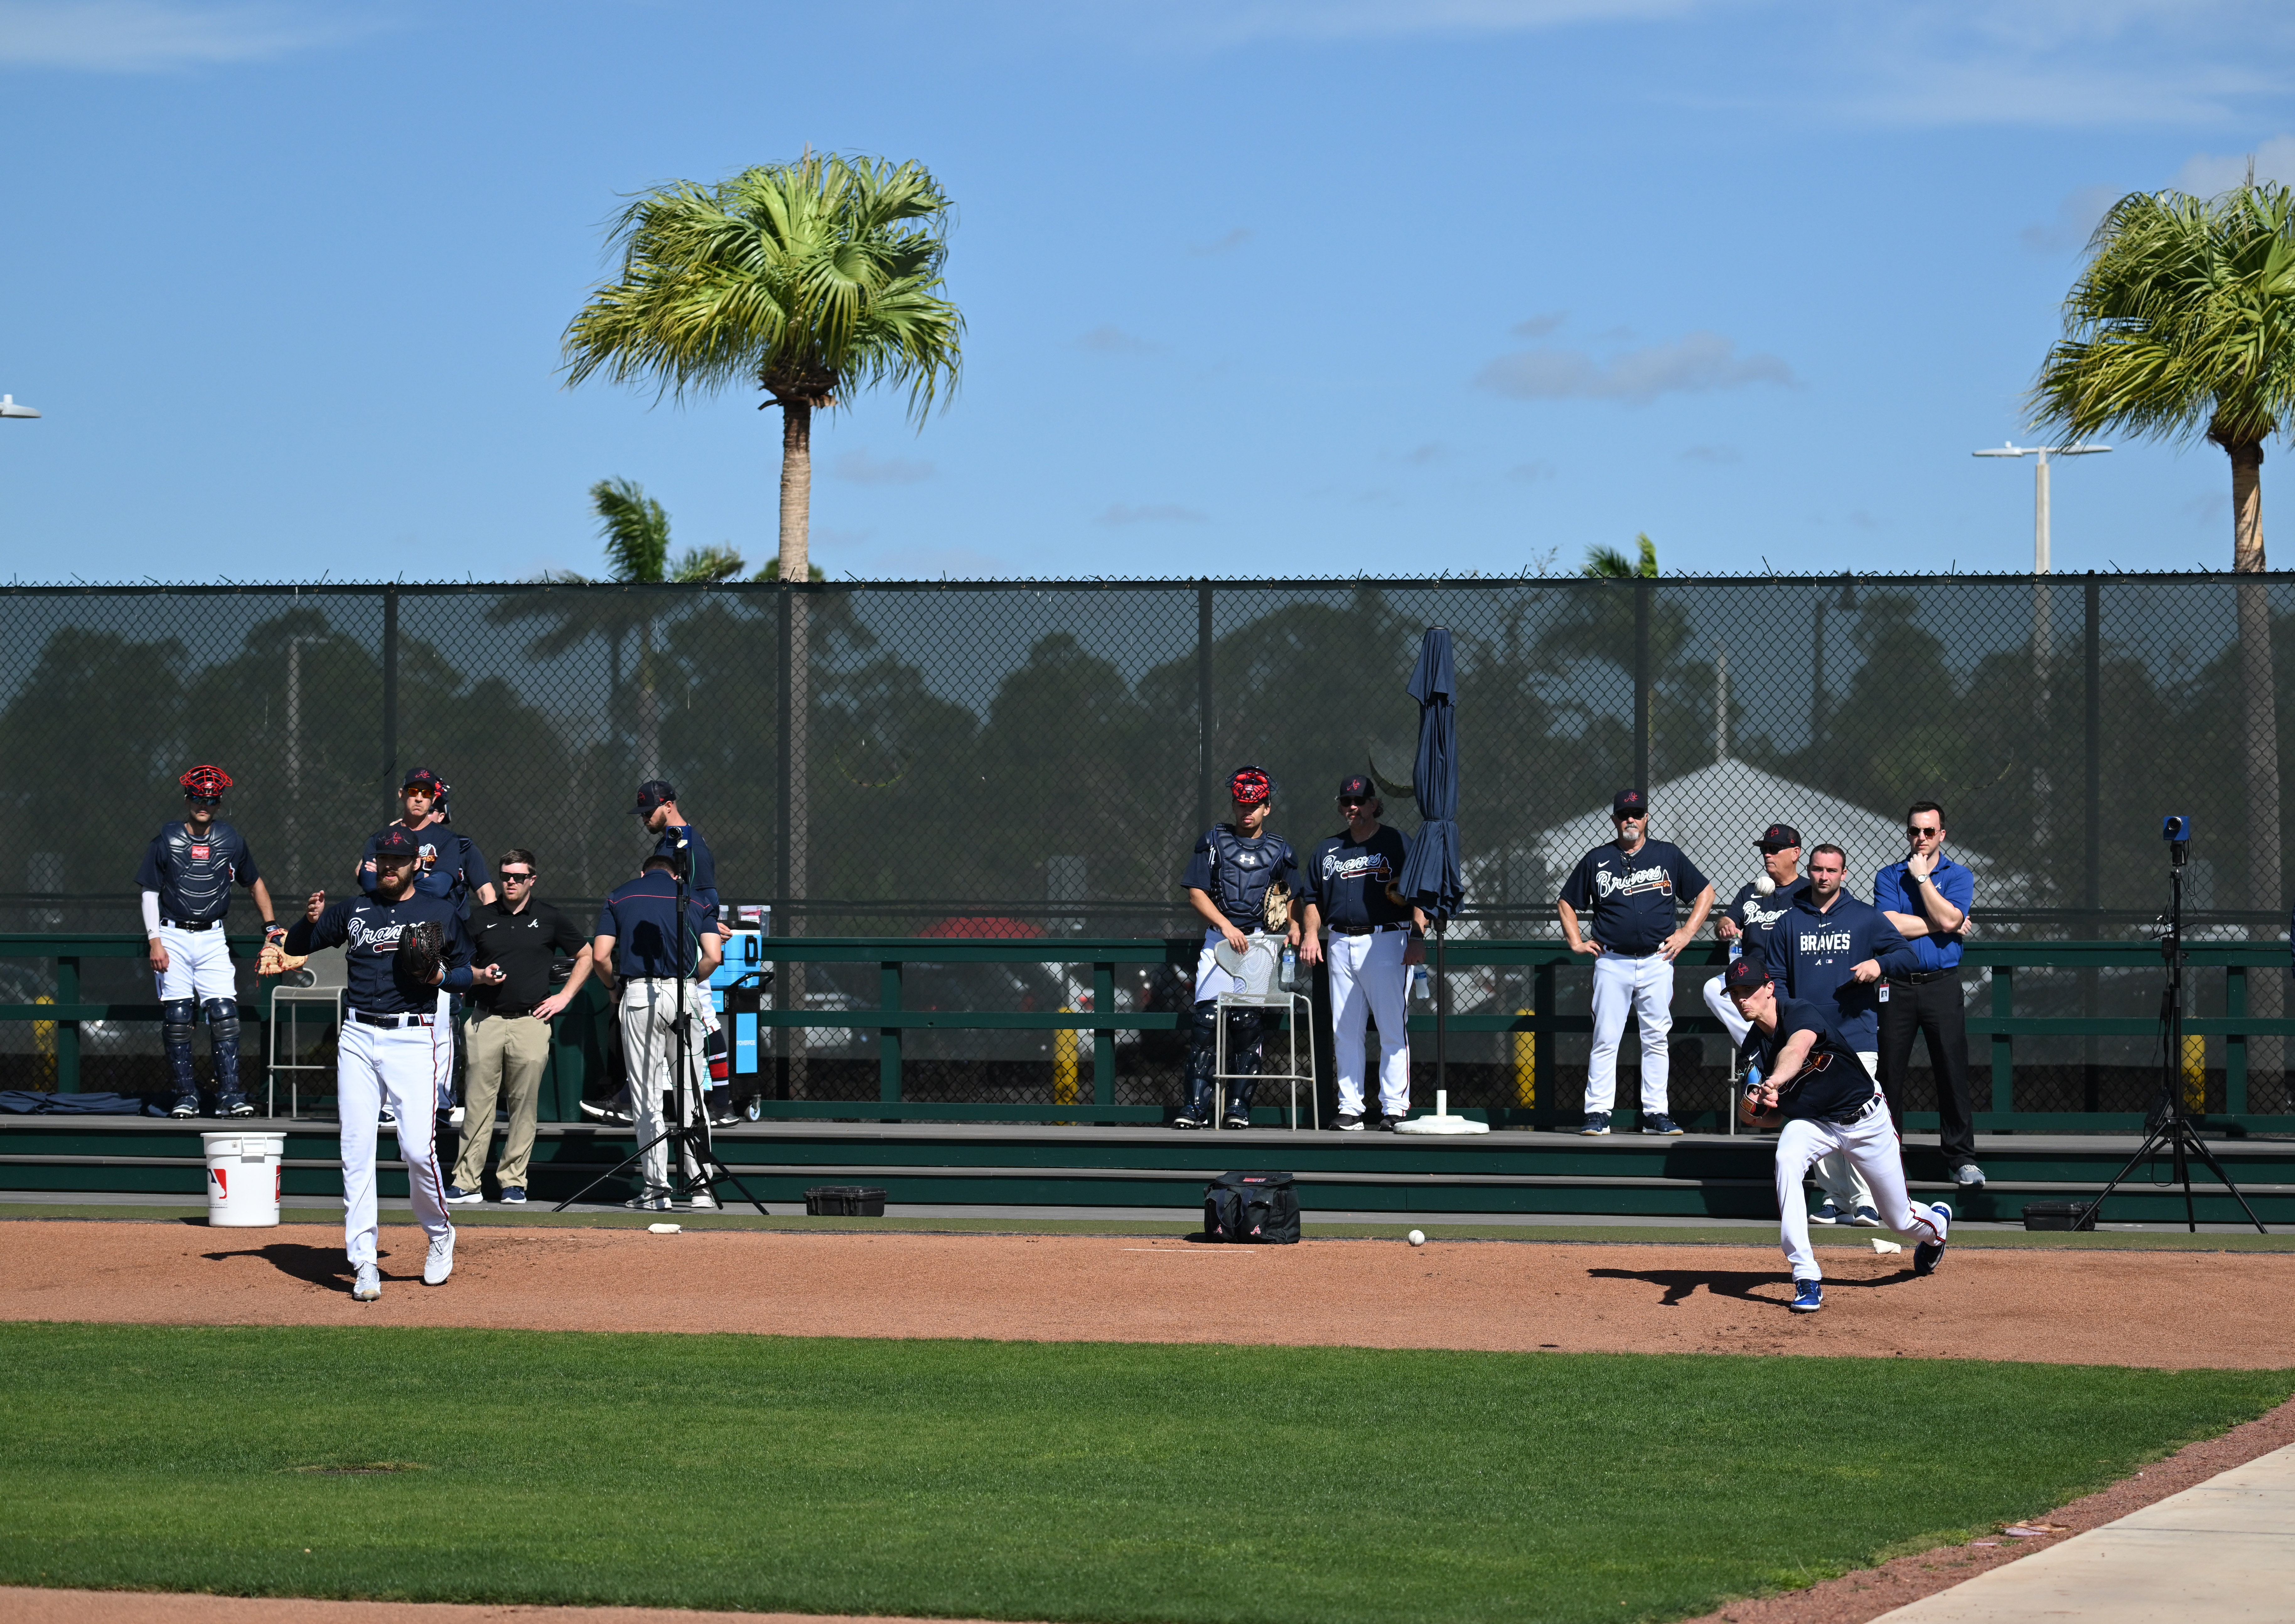 Max Fried, Spencer Strider, Kirby Yates throw BP. Here's how it went